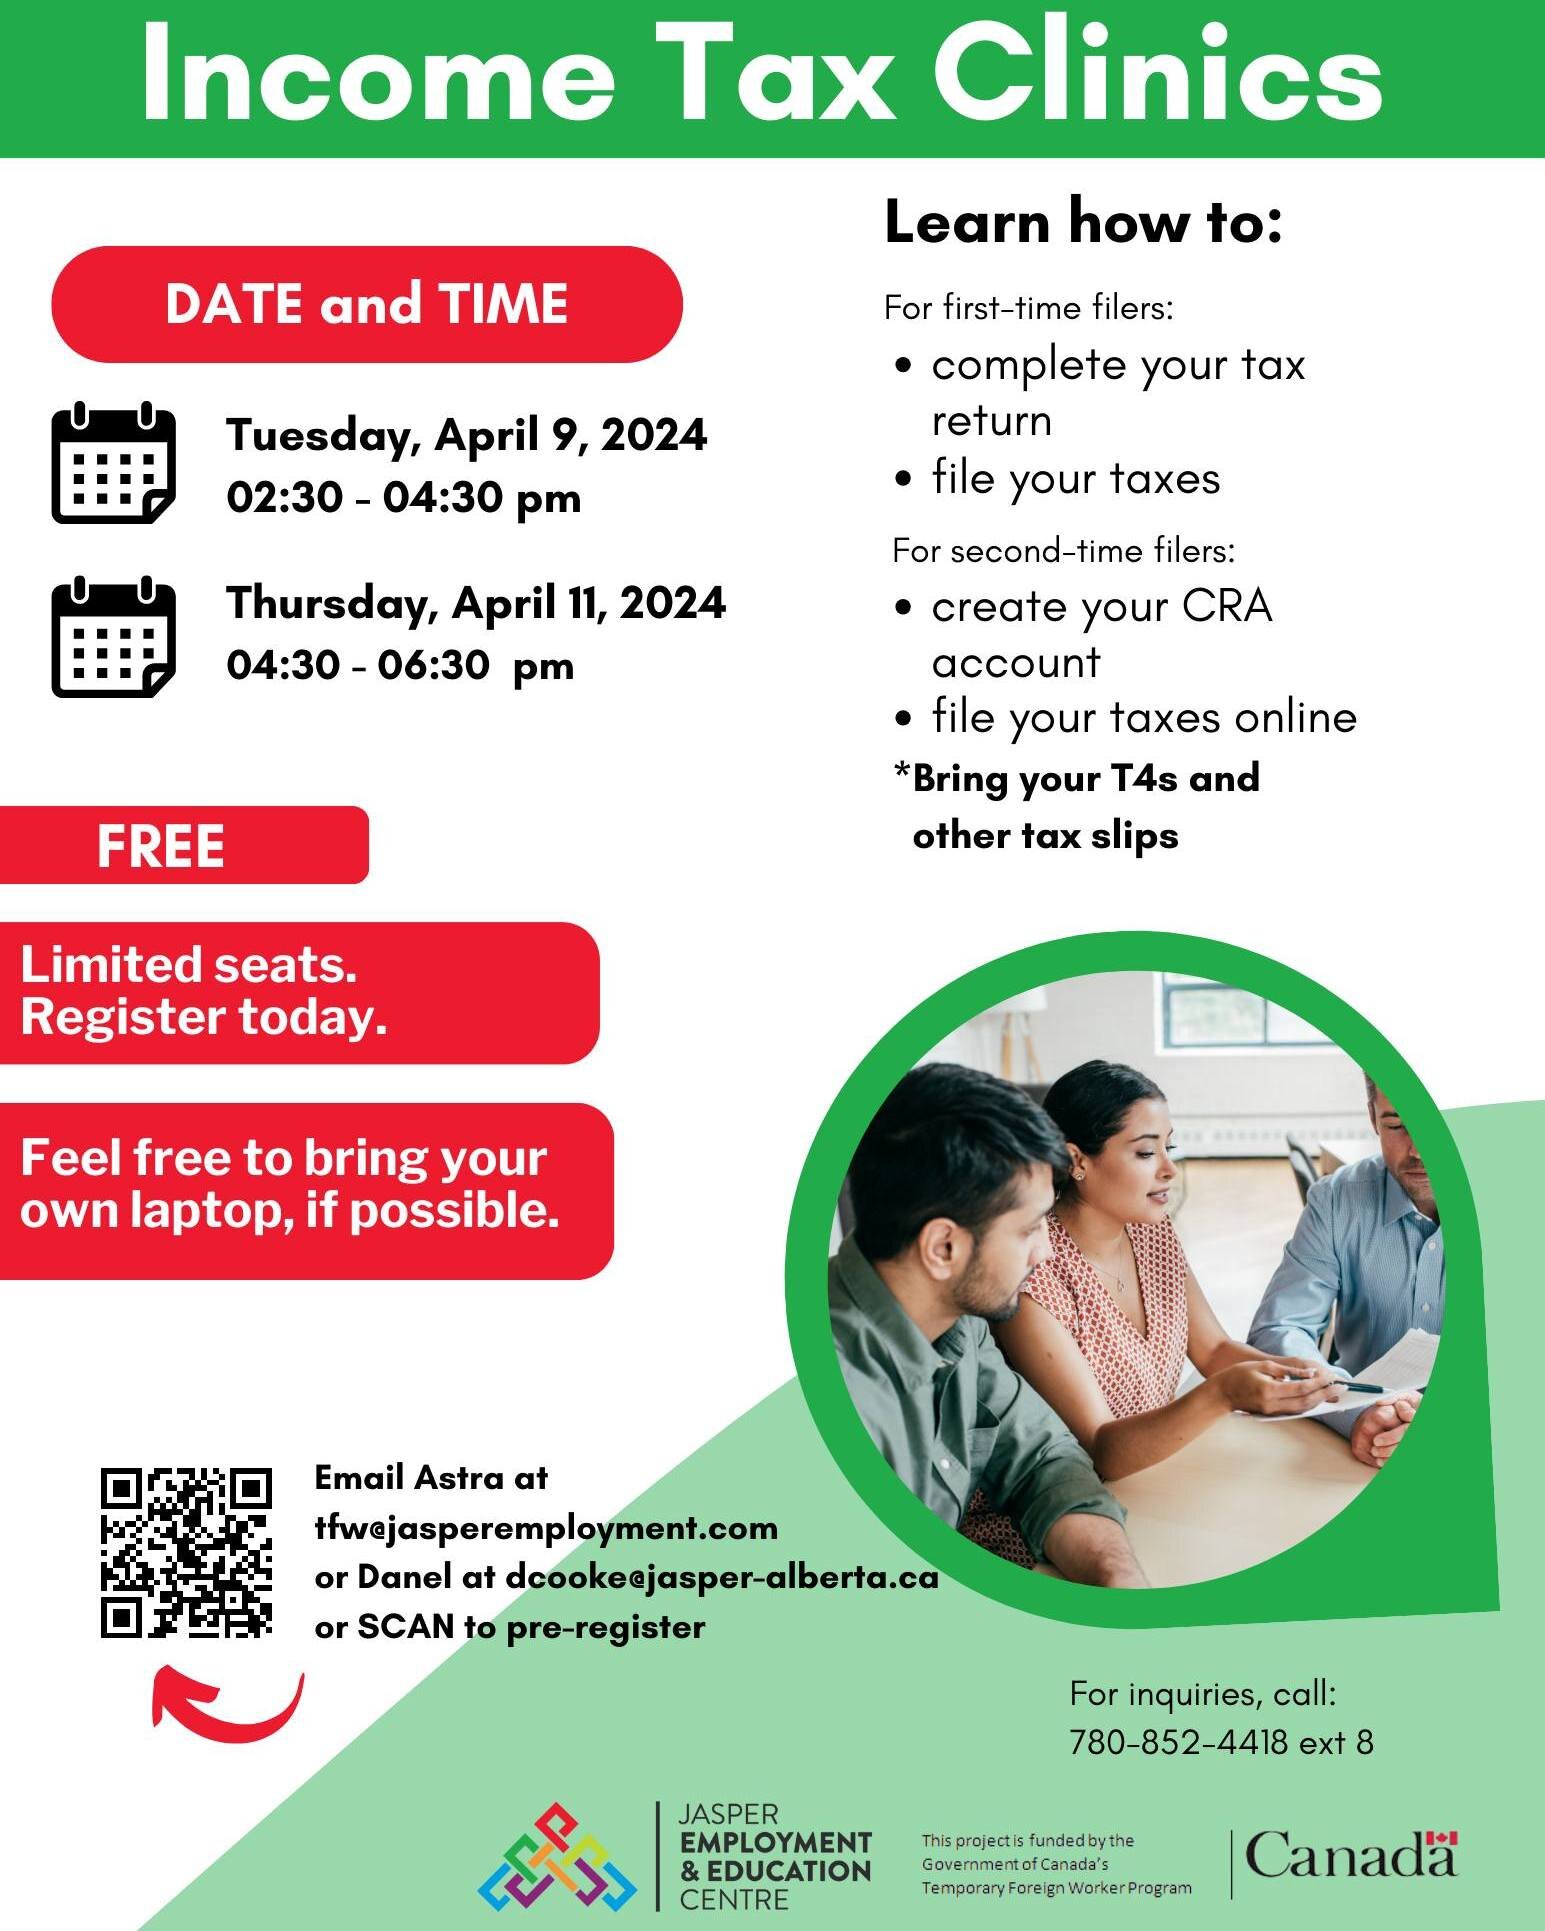 Ready to tackle your taxes head-on? 
Join us for our Income Tax Sessions at JEEC! 
April slots are available &ndash; reserve yours today! 
Simply scan the QR code or follow the link to secure your spot: 
https://forms.gle/exYZDPD5j8668Lgj9